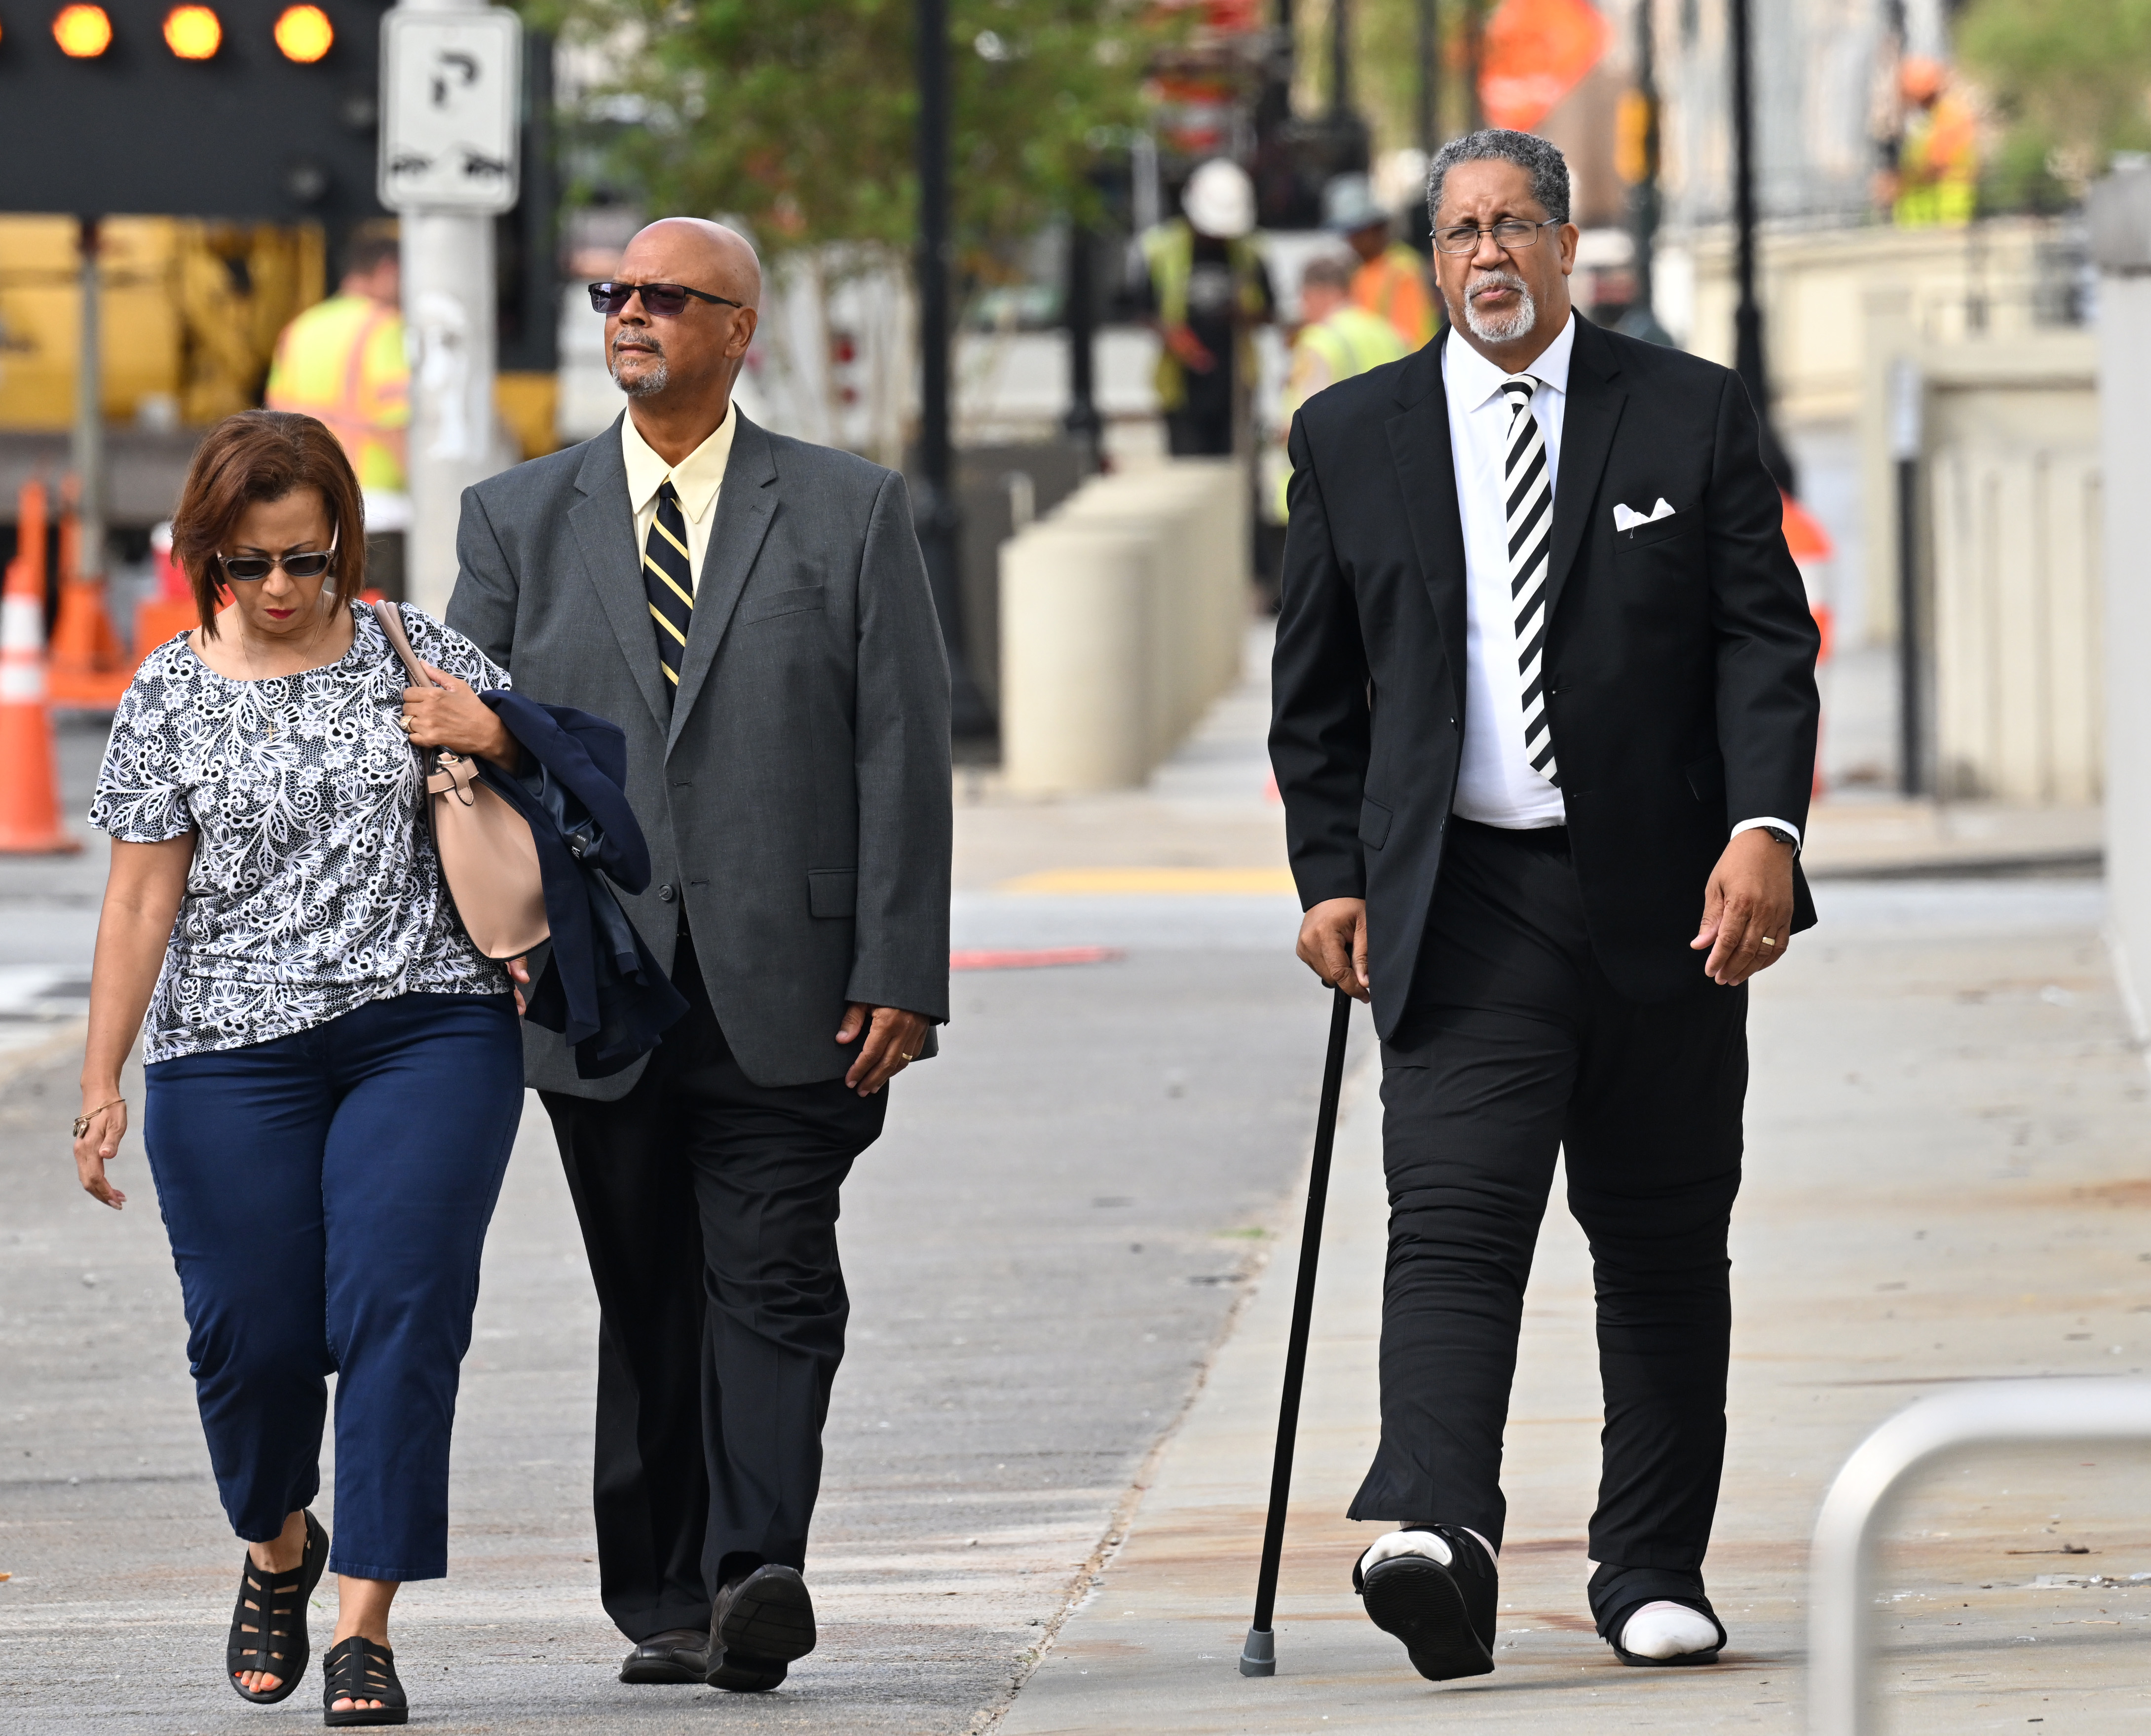 July 13, 2022 Atlanta - Former Stonecrest Mayor Jason Lary (right) arrives at the Richard B. Russell Federal Building for his sentencing hearing in a federal fraud case related to the misuse of relief funds City's COVID on Wednesday, July 13, 2022. (Hyosub Shin / Hyosub.Shin@ajc.com)